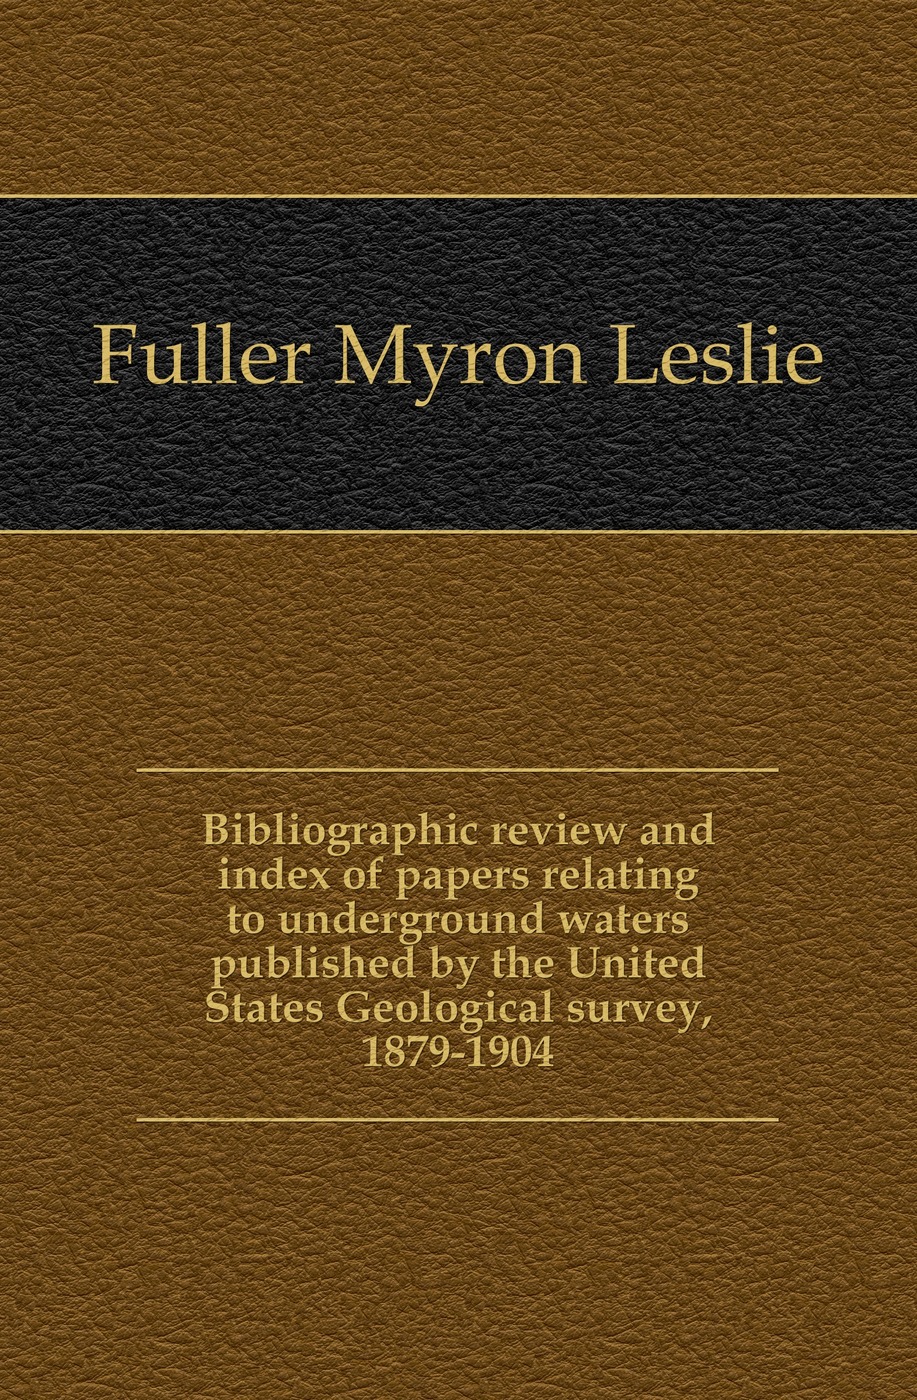 Bibliographic review and index of papers relating to underground waters published by the United States Geological survey, 1879-1904